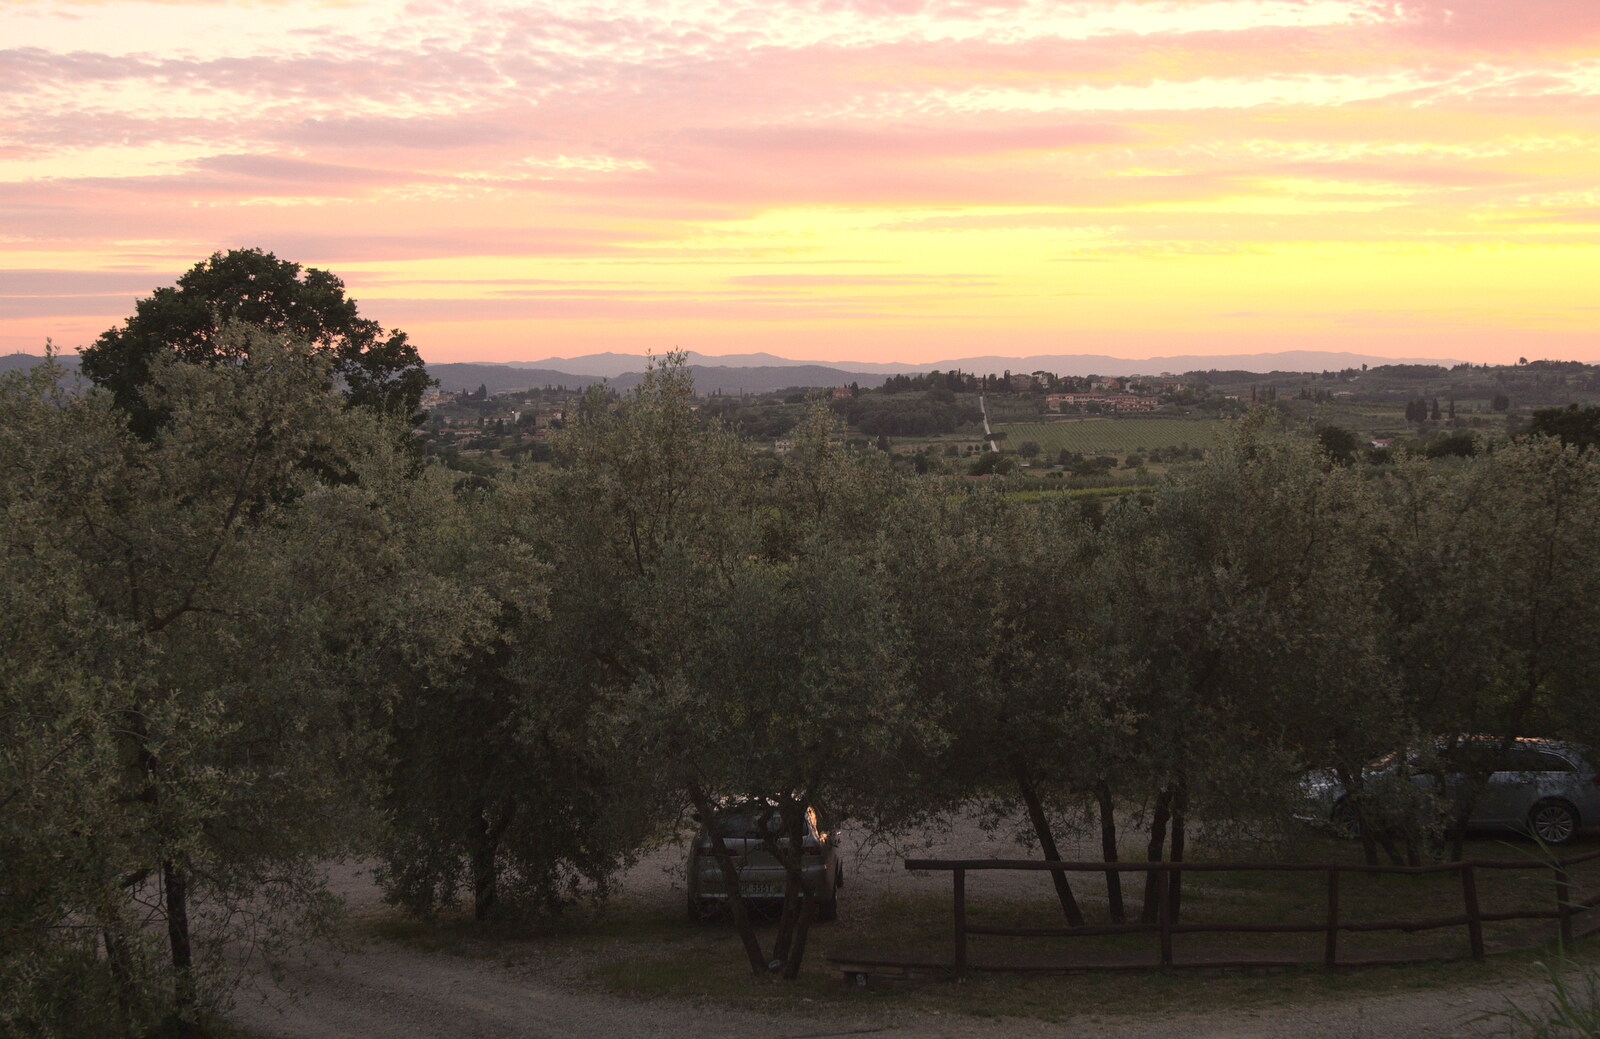 Sunset over the car park from La Verna Monastery and the Fireflies of Tuscany, Italy - 14th June 2013